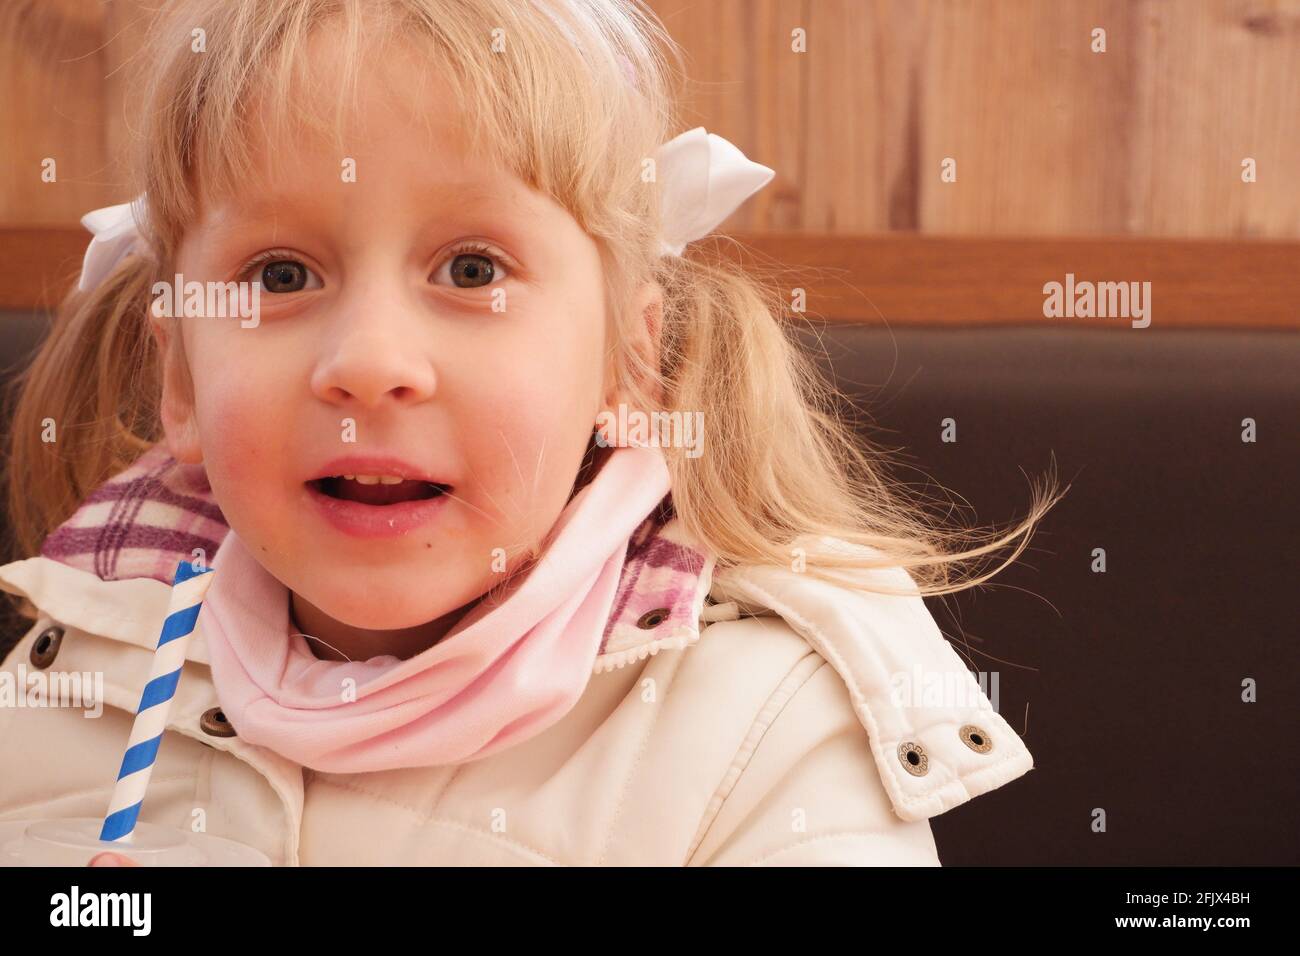 A little girl in a cafe drinks a drink from a striped tube Stock Photo